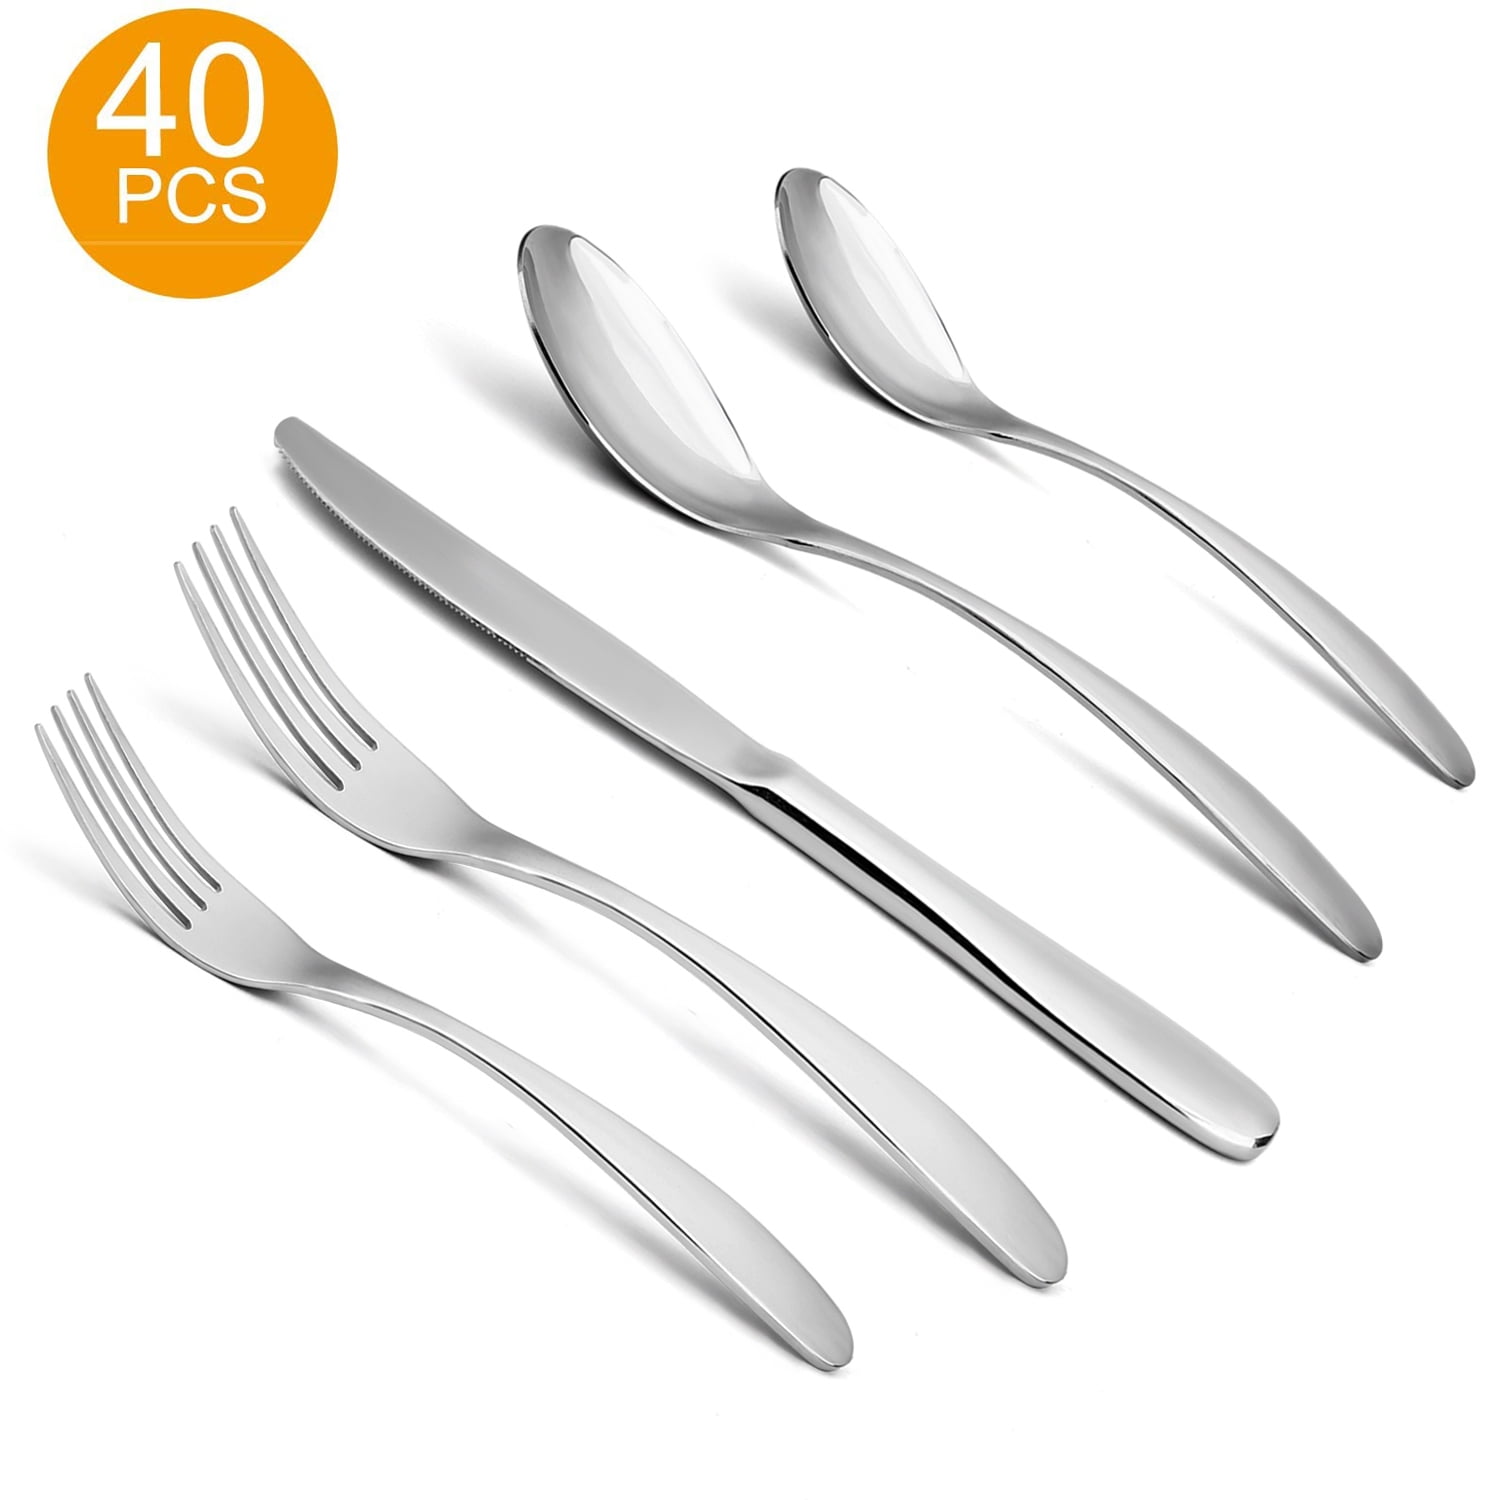 Kitchen Silverware Flatware Set With Hanging Rack Serves 20 Piece Colored Handle 